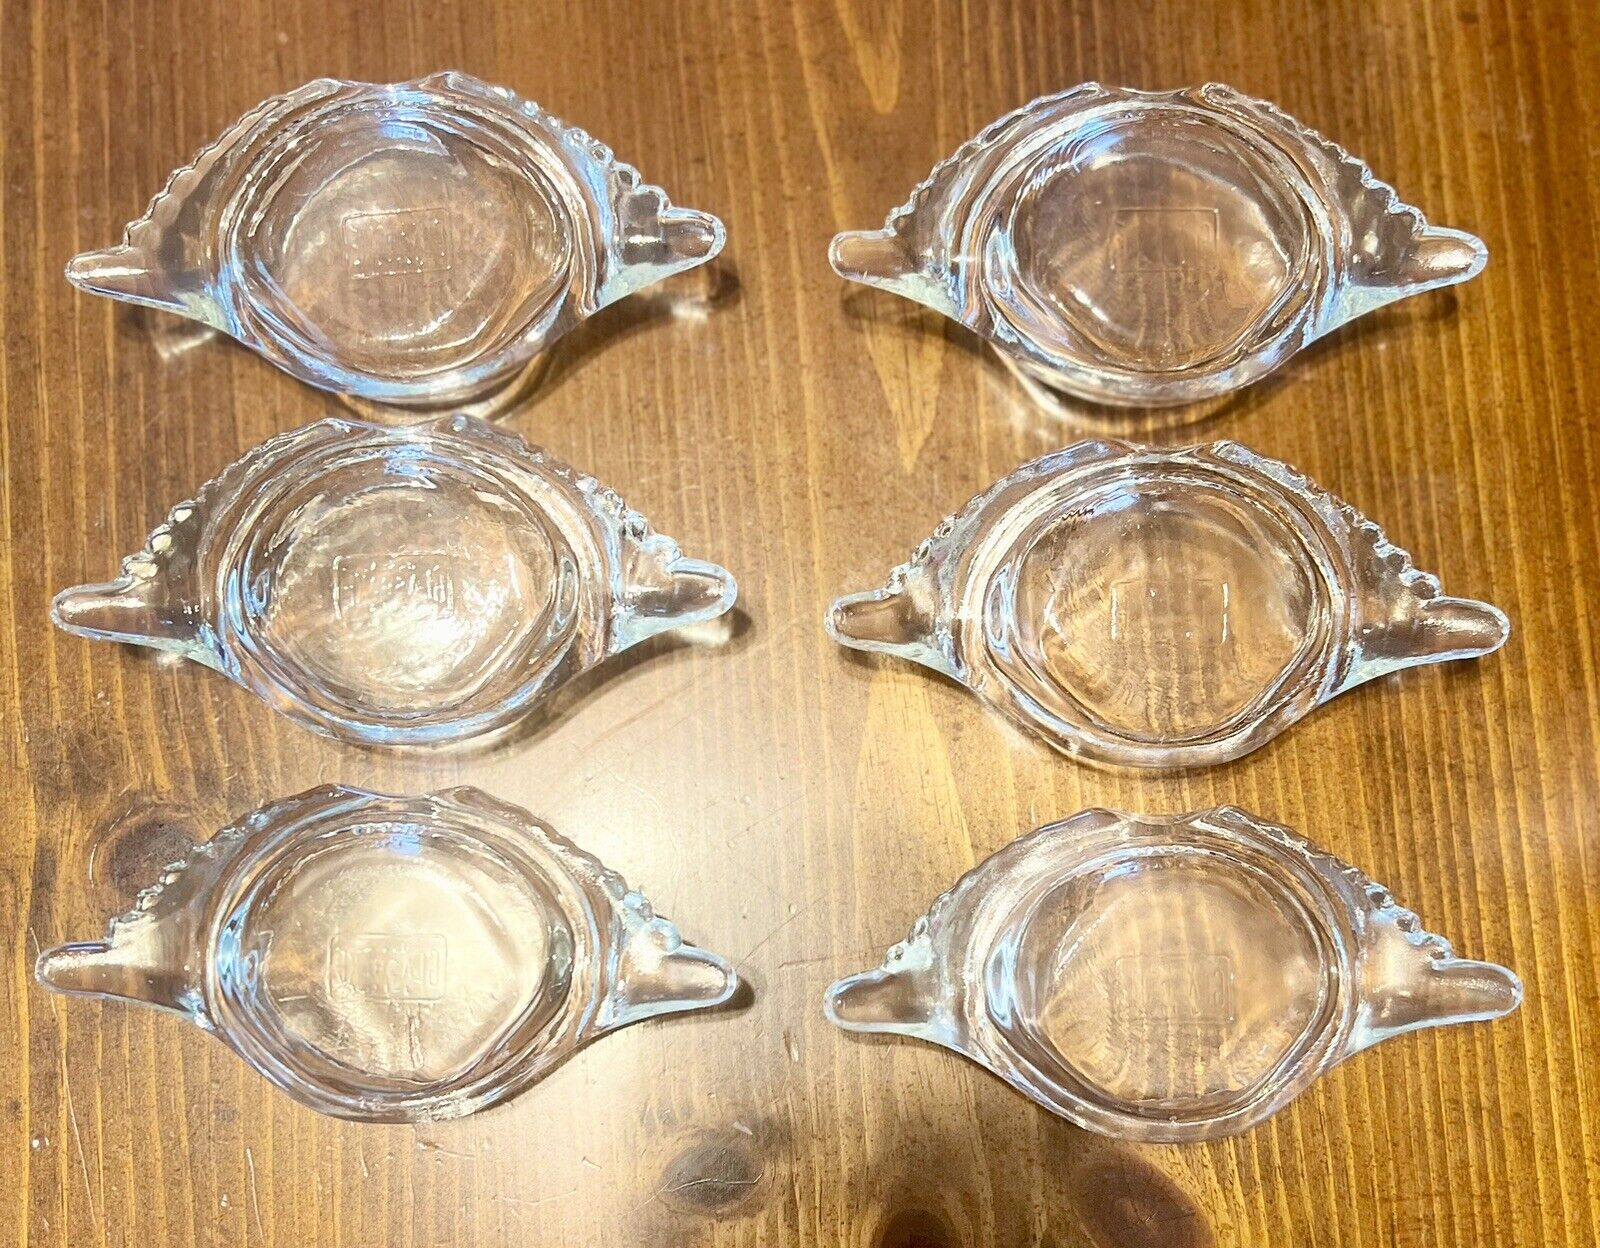 6 VINTAGE MCM Glasbake Clear Glass Deviled Crab Dishes Imperial Baking Shells US